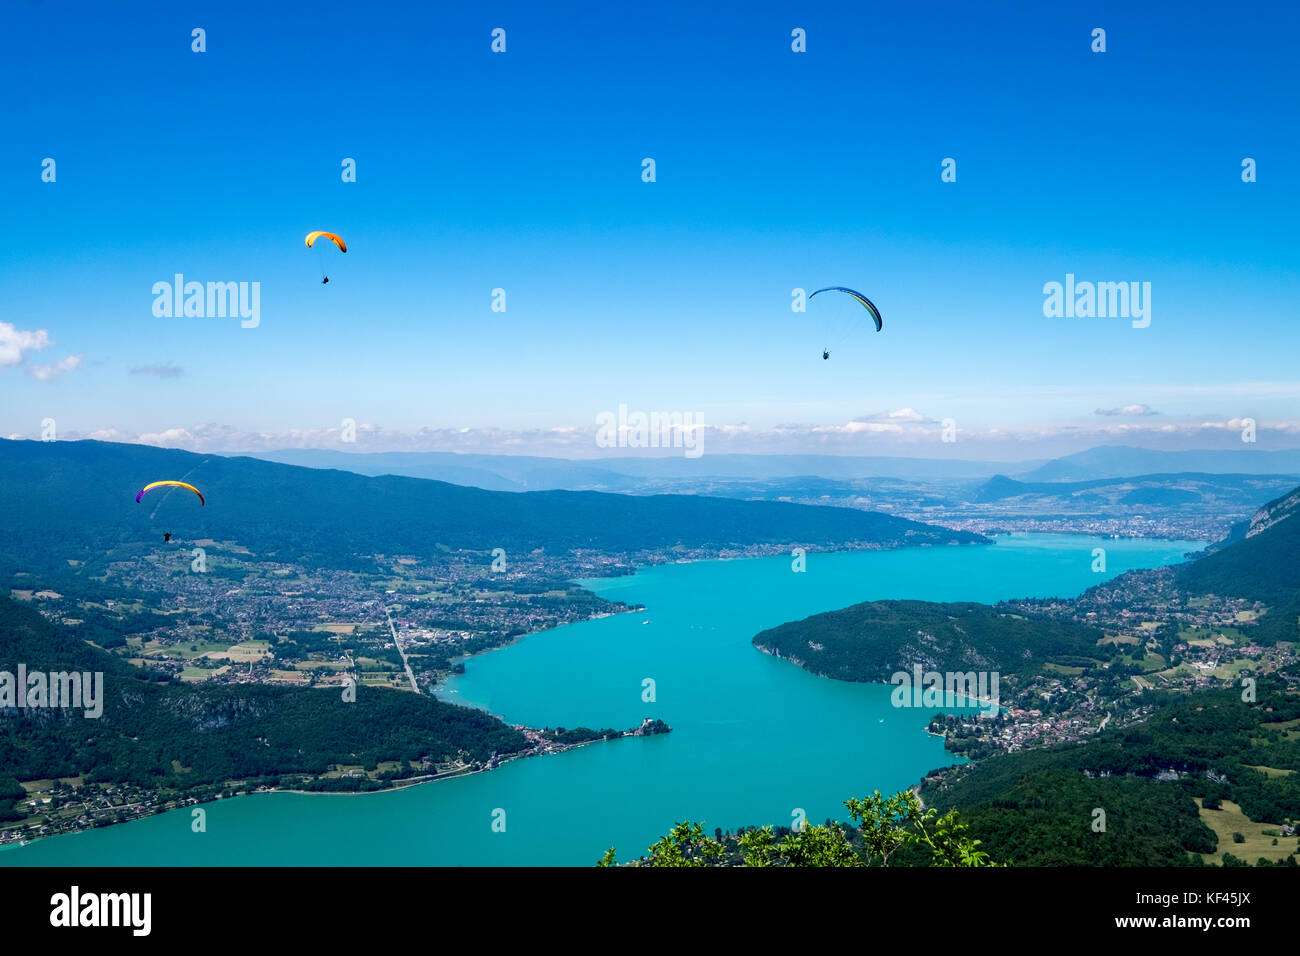 Lake Annecy from Col de la Forclaz with paragliders Stock Photo